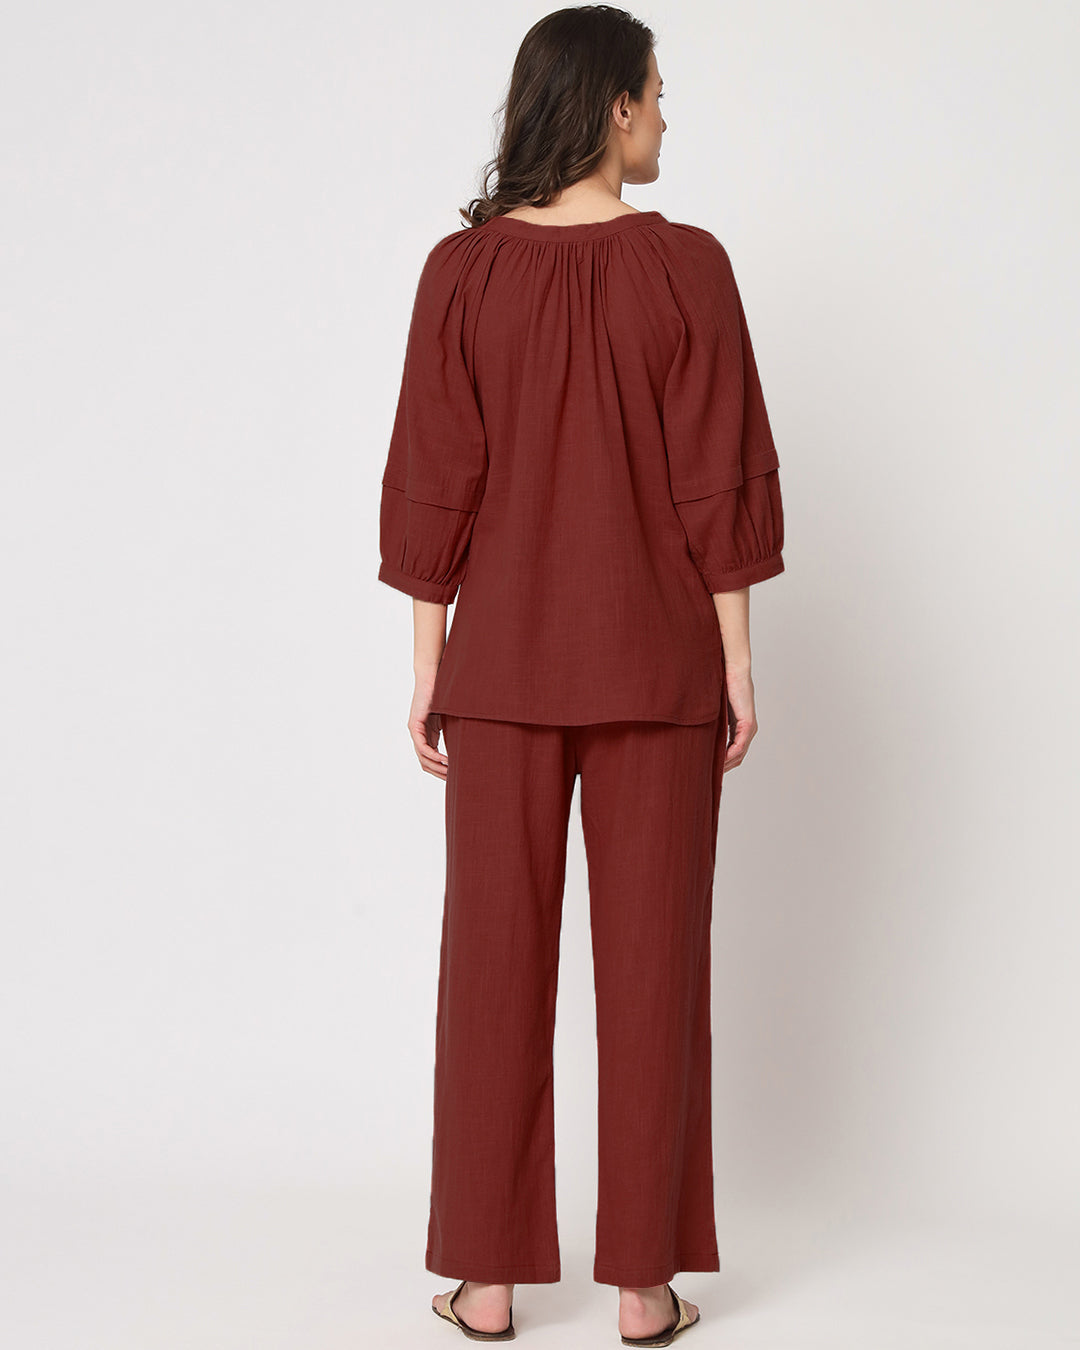 Russet Red Button Neck Solid Top (Without Bottoms)